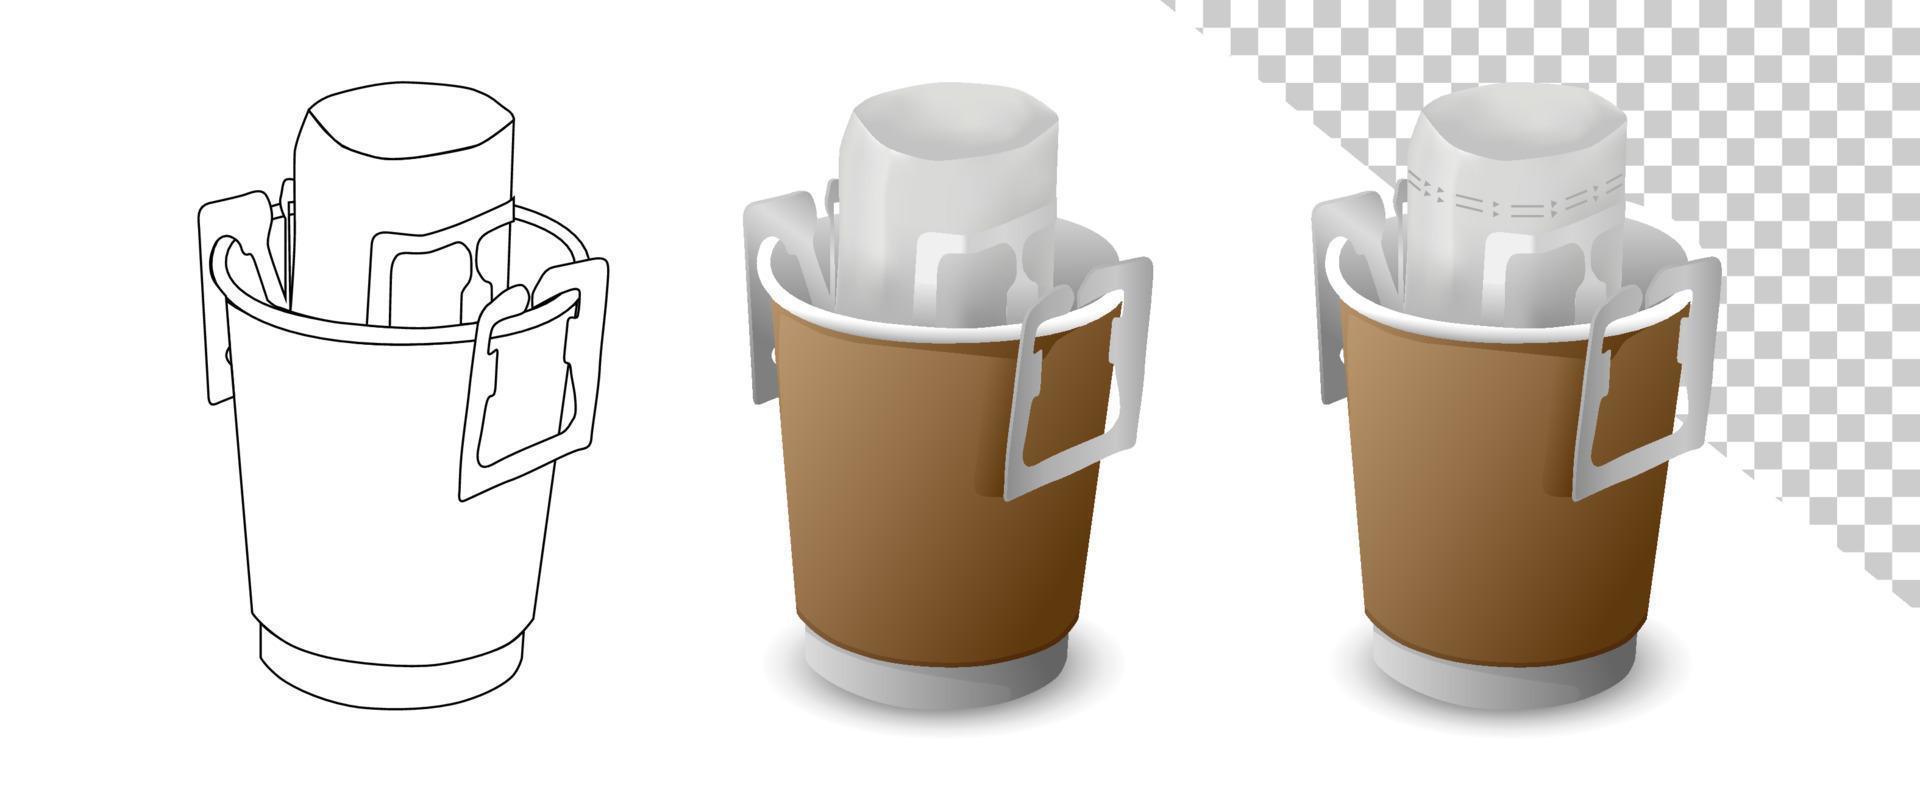 Drip coffee with portable drip bag vector on white background. Craft cup with coffee bag in cup.